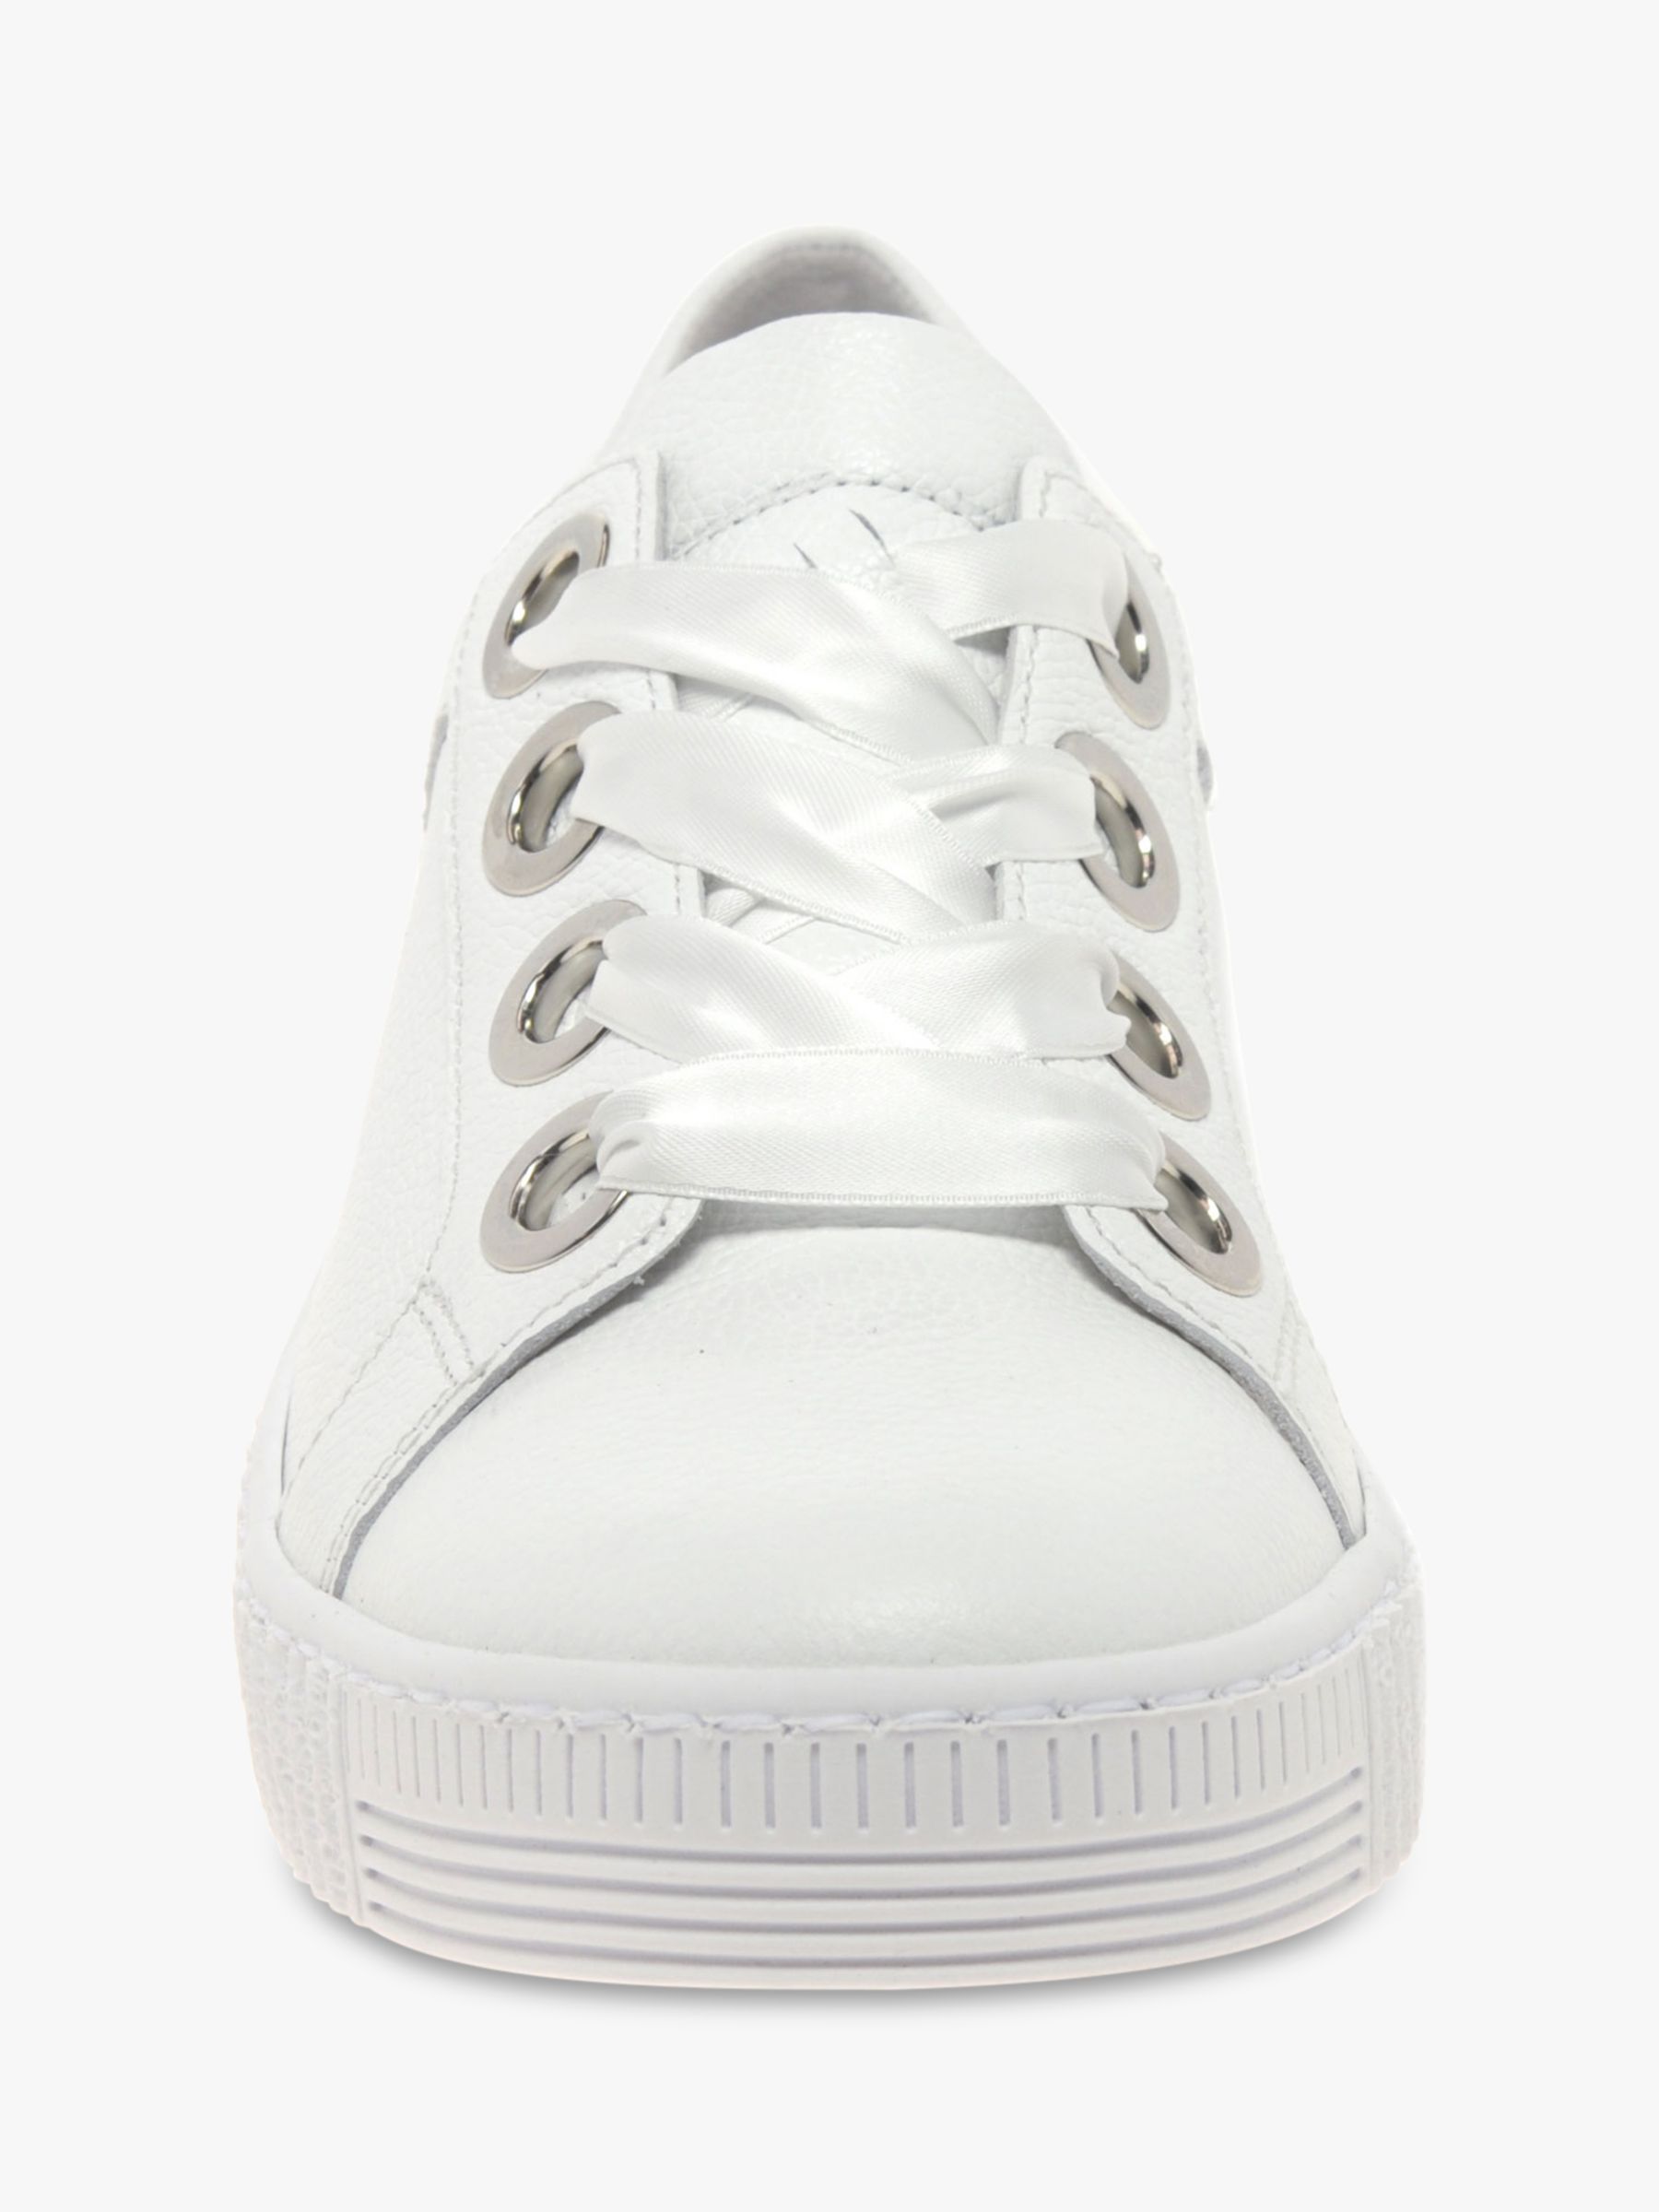 Gabor Wright Low Top Trainers at John 